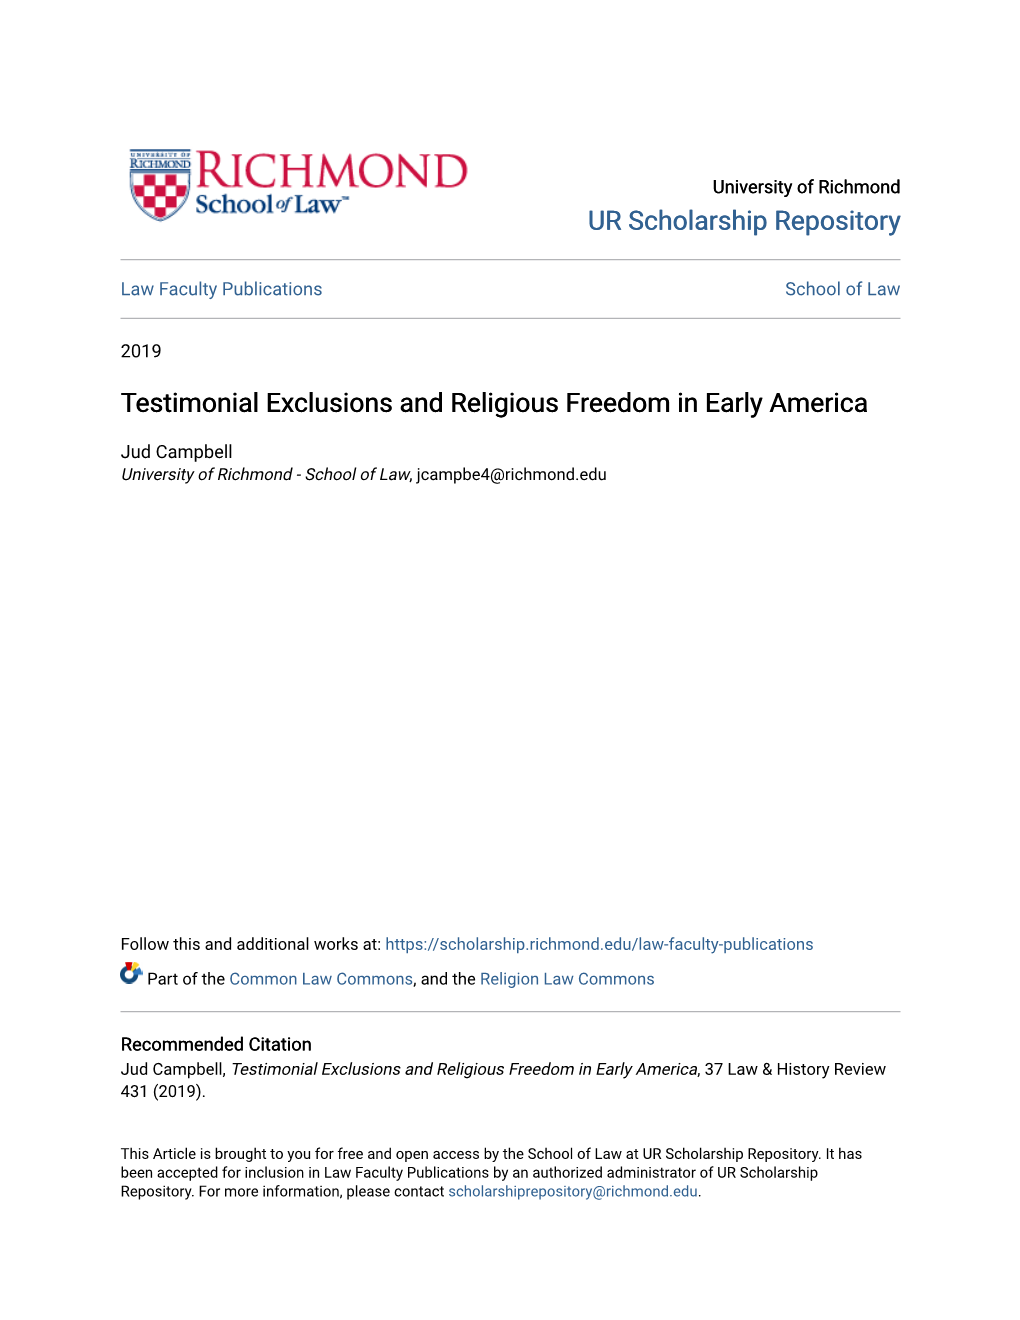 Testimonial Exclusions and Religious Freedom in Early America